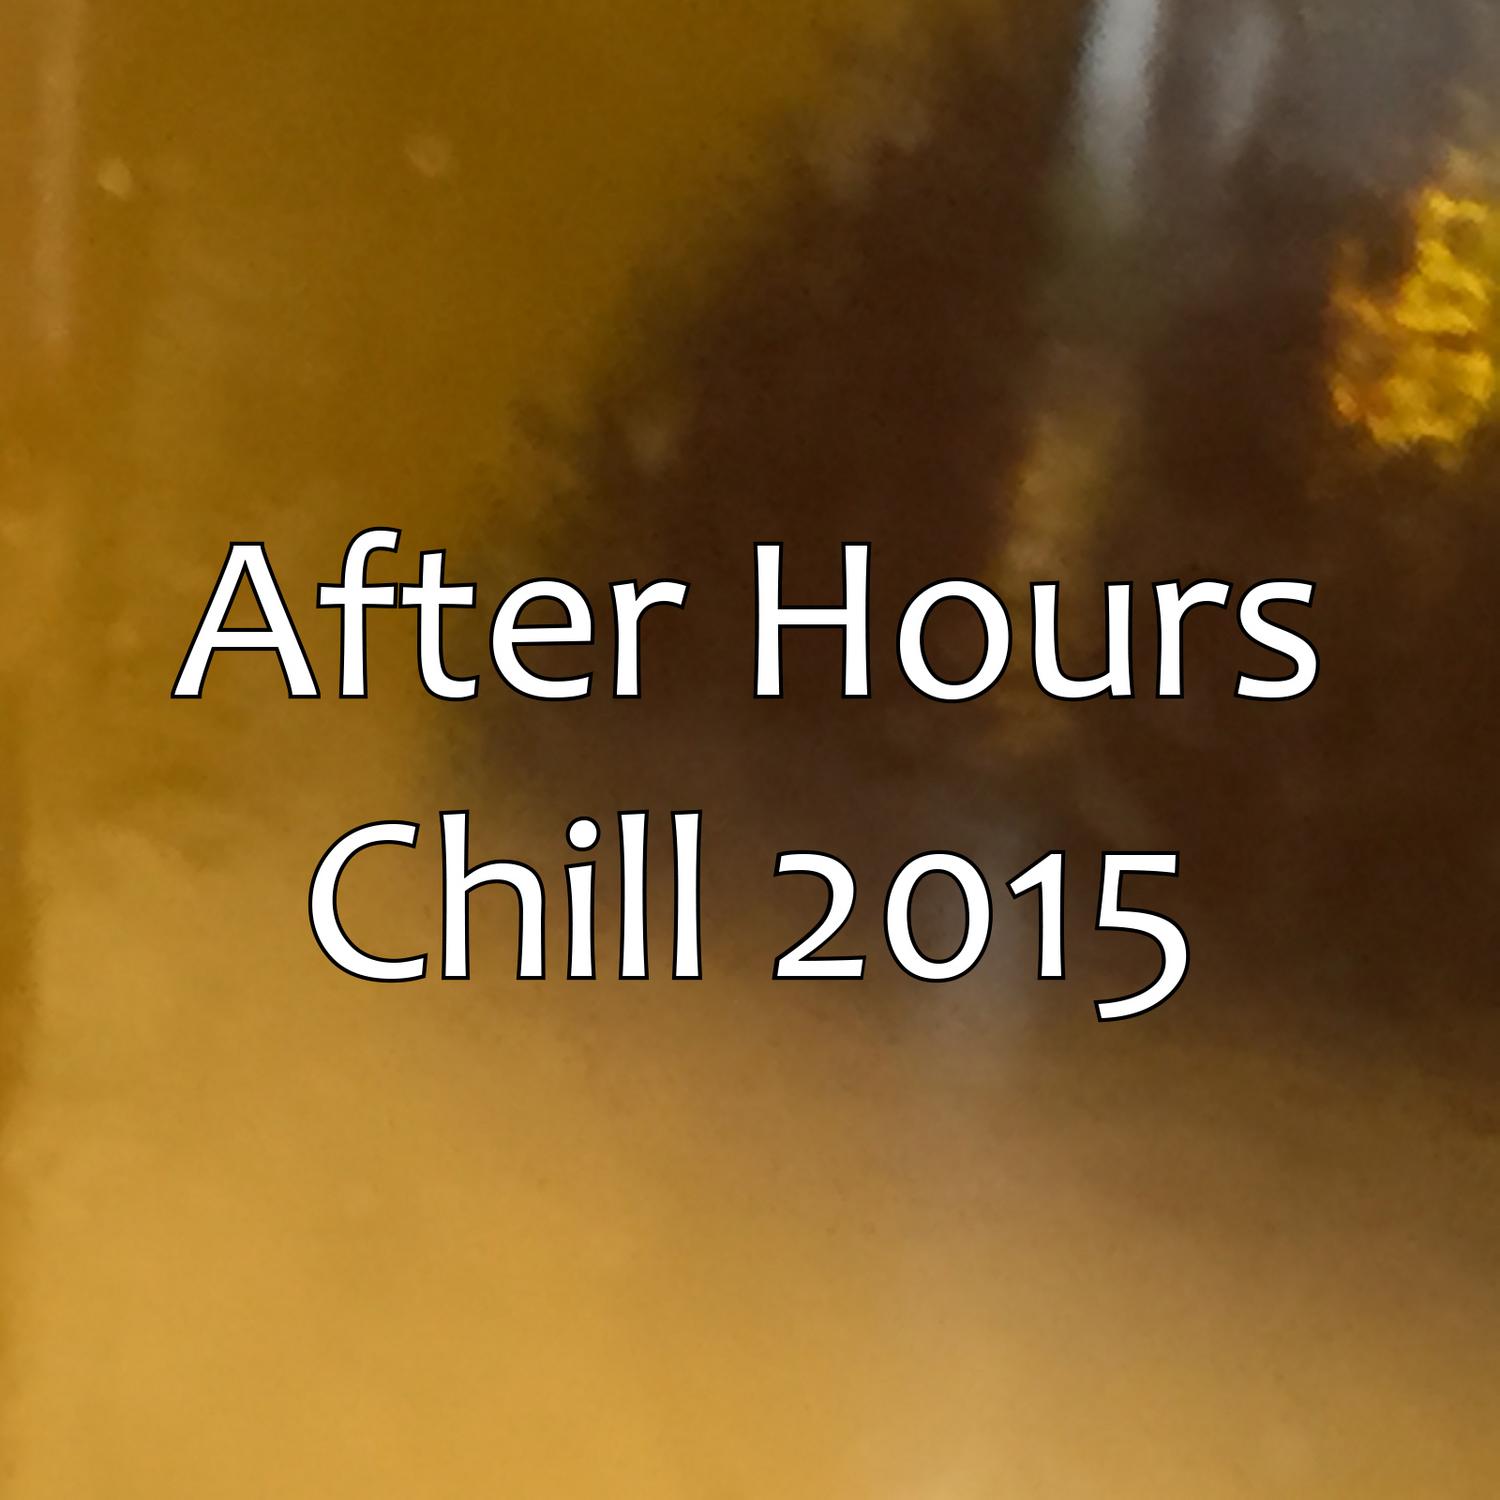 After Hours - Chill 2015